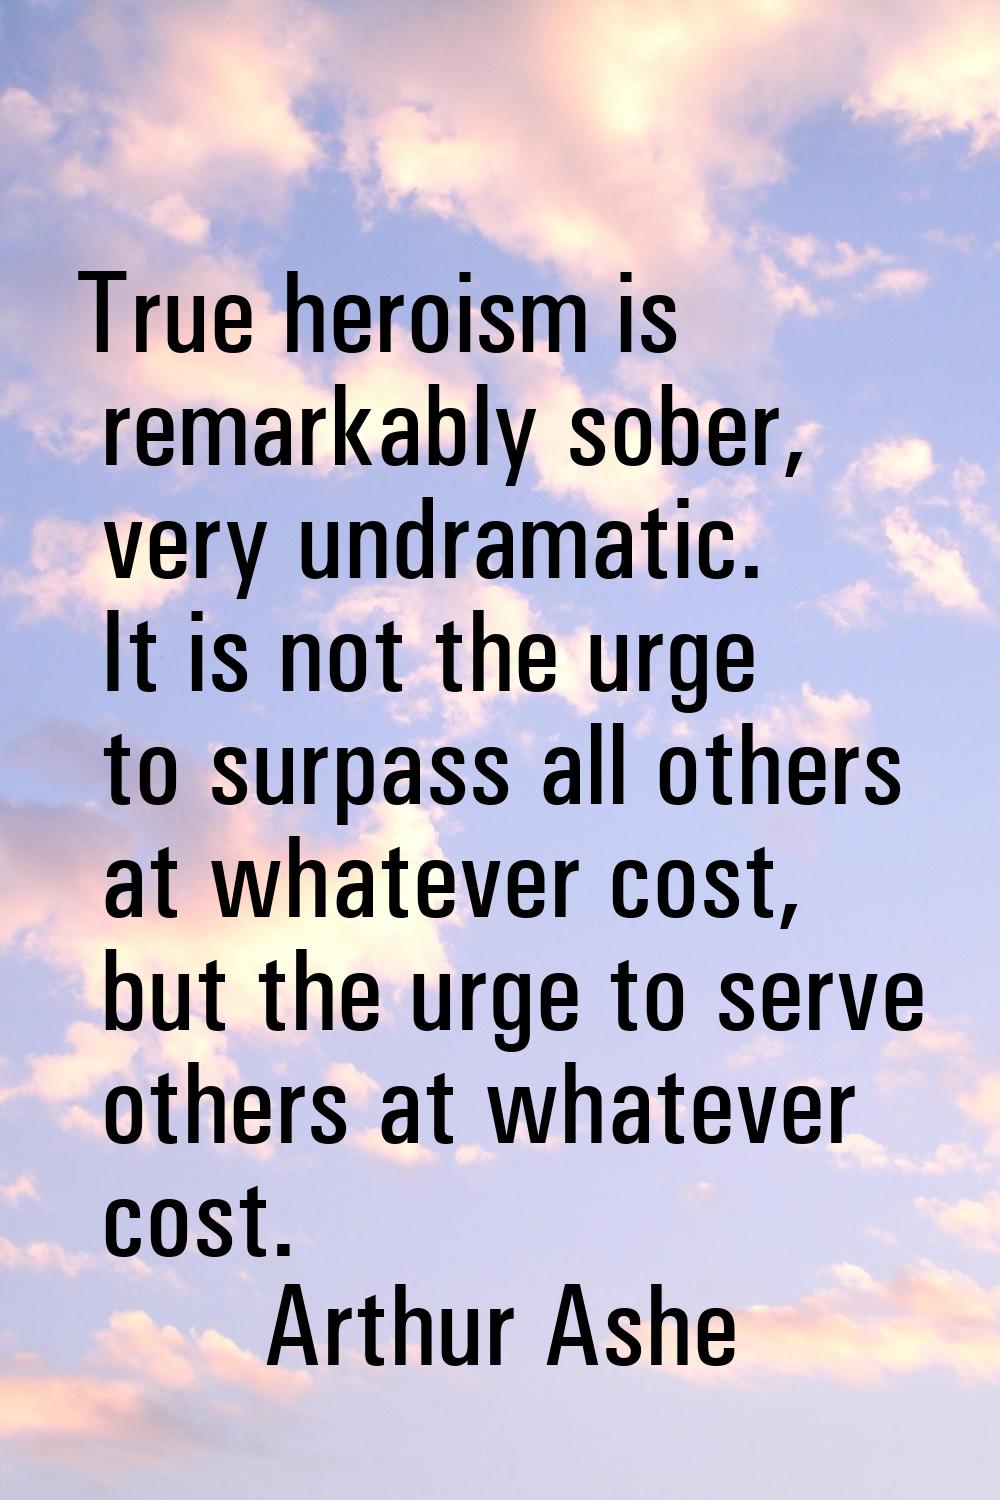 True heroism is remarkably sober, very undramatic. It is not the urge to surpass all others at what